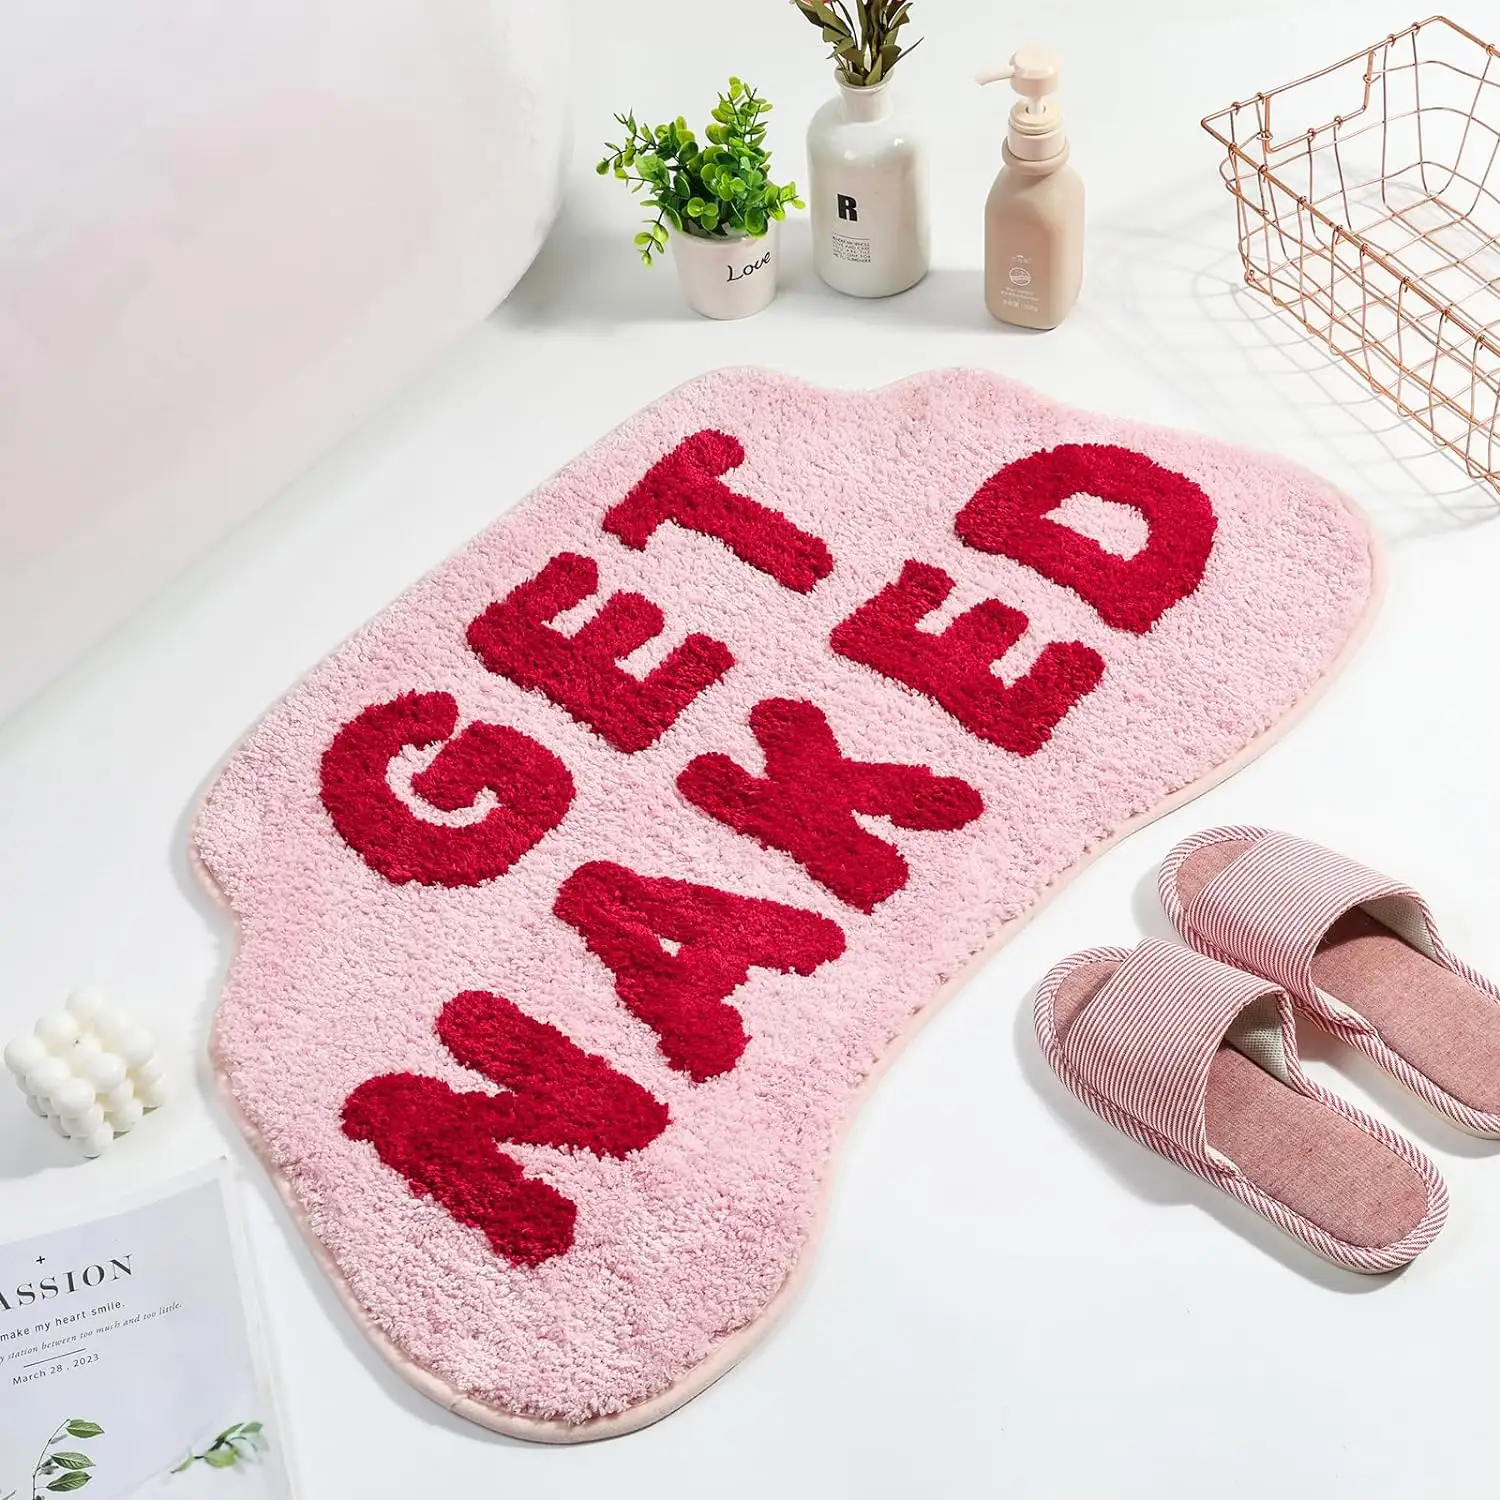 Funny Get Naked Bath Mat Non Slip Water Absorbent Fluffy Tufted Bath Mat For Bathroom